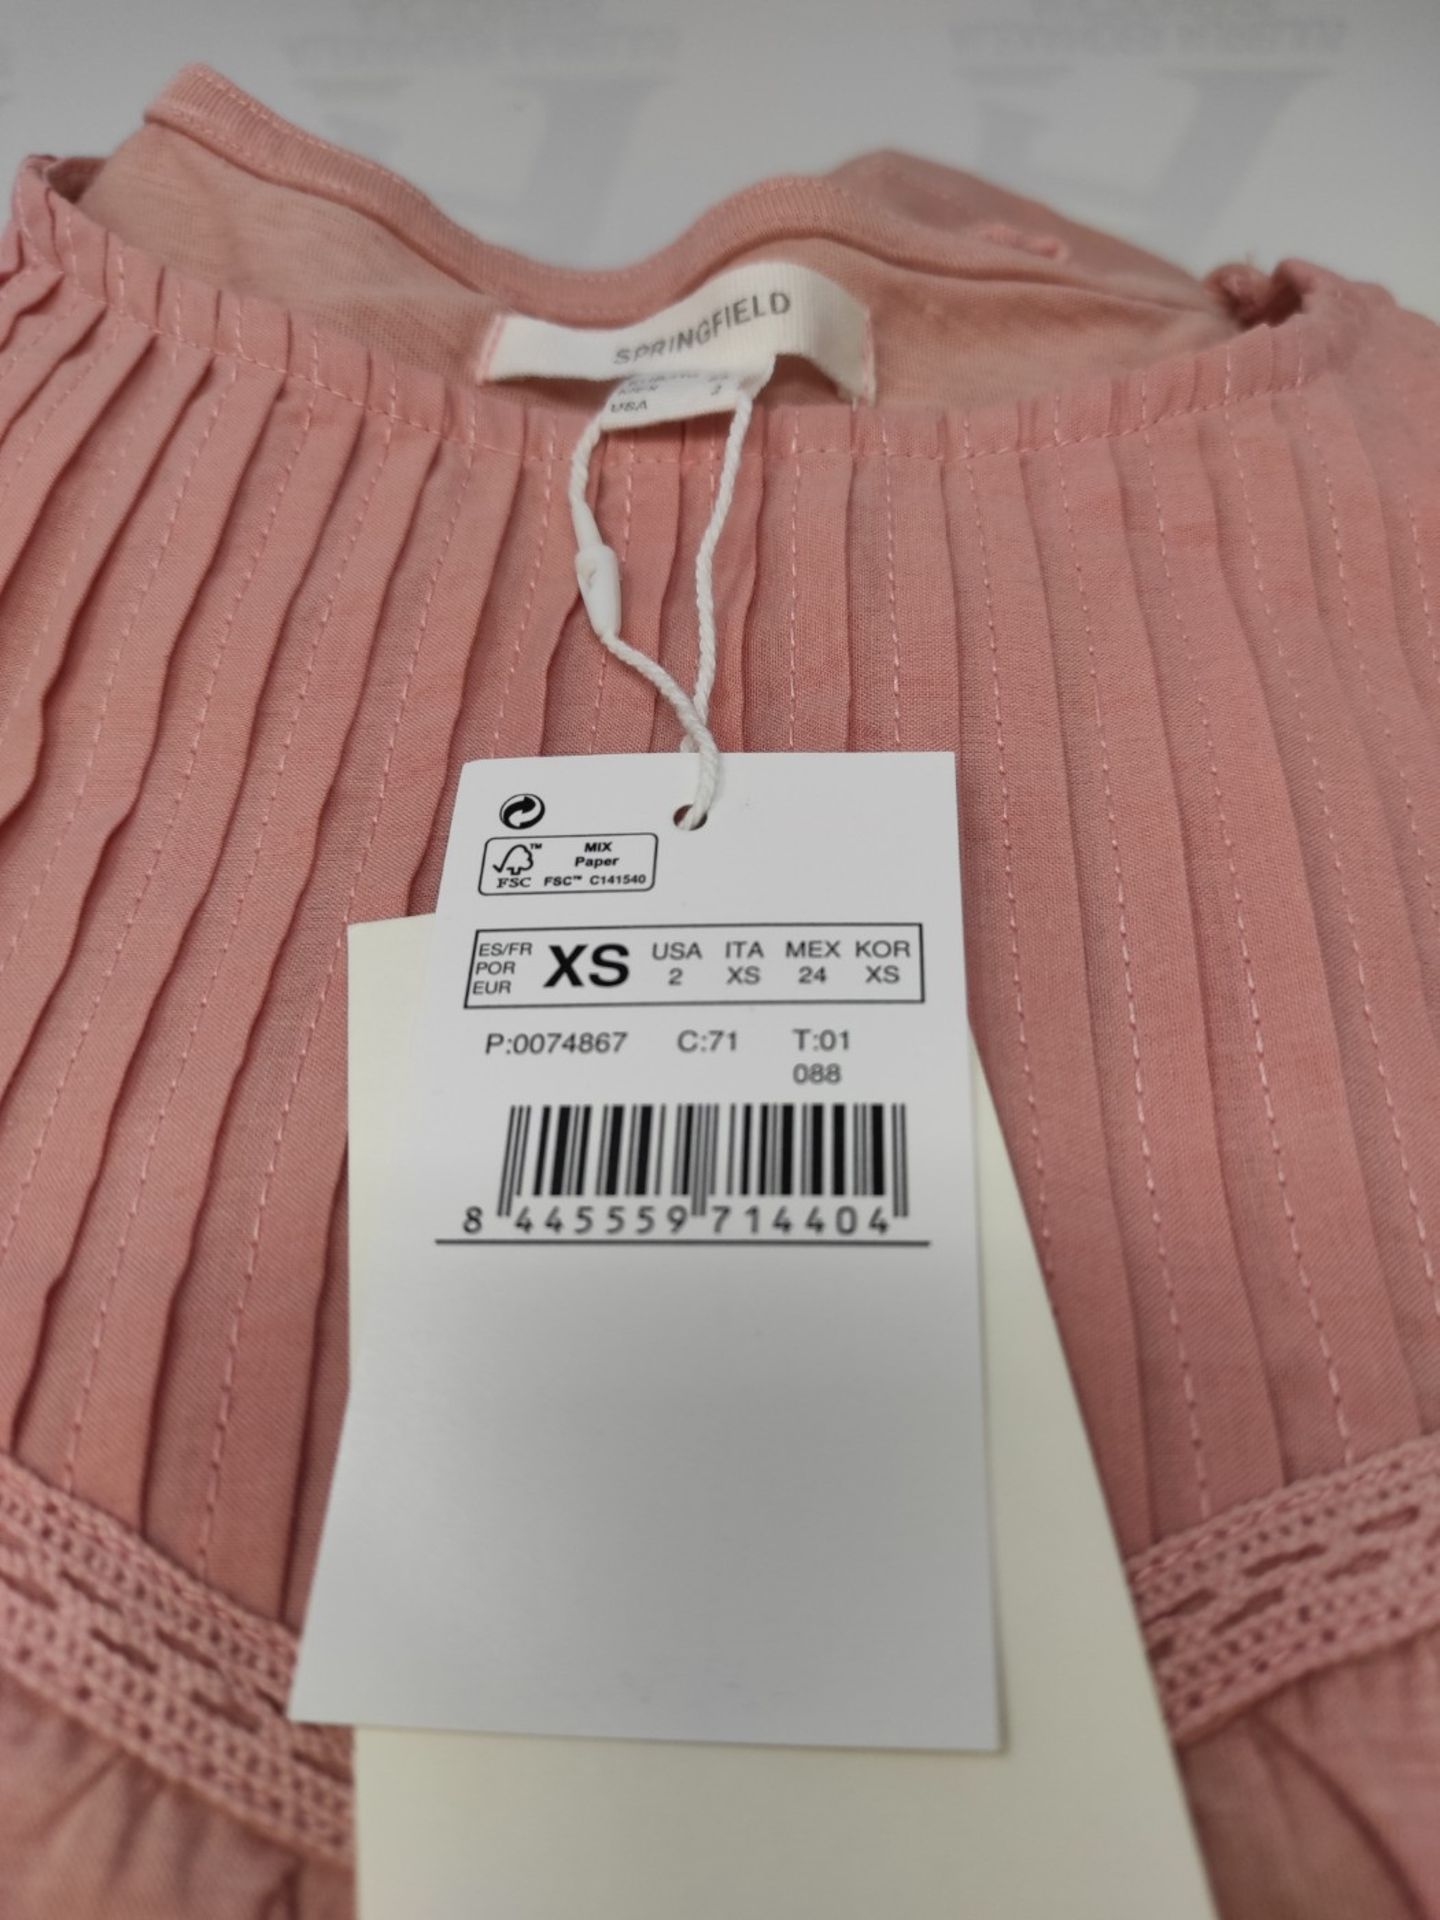 Springfield Pleated Bicolor Blouse T-Shirt, Pink, XS Woman - Image 6 of 6